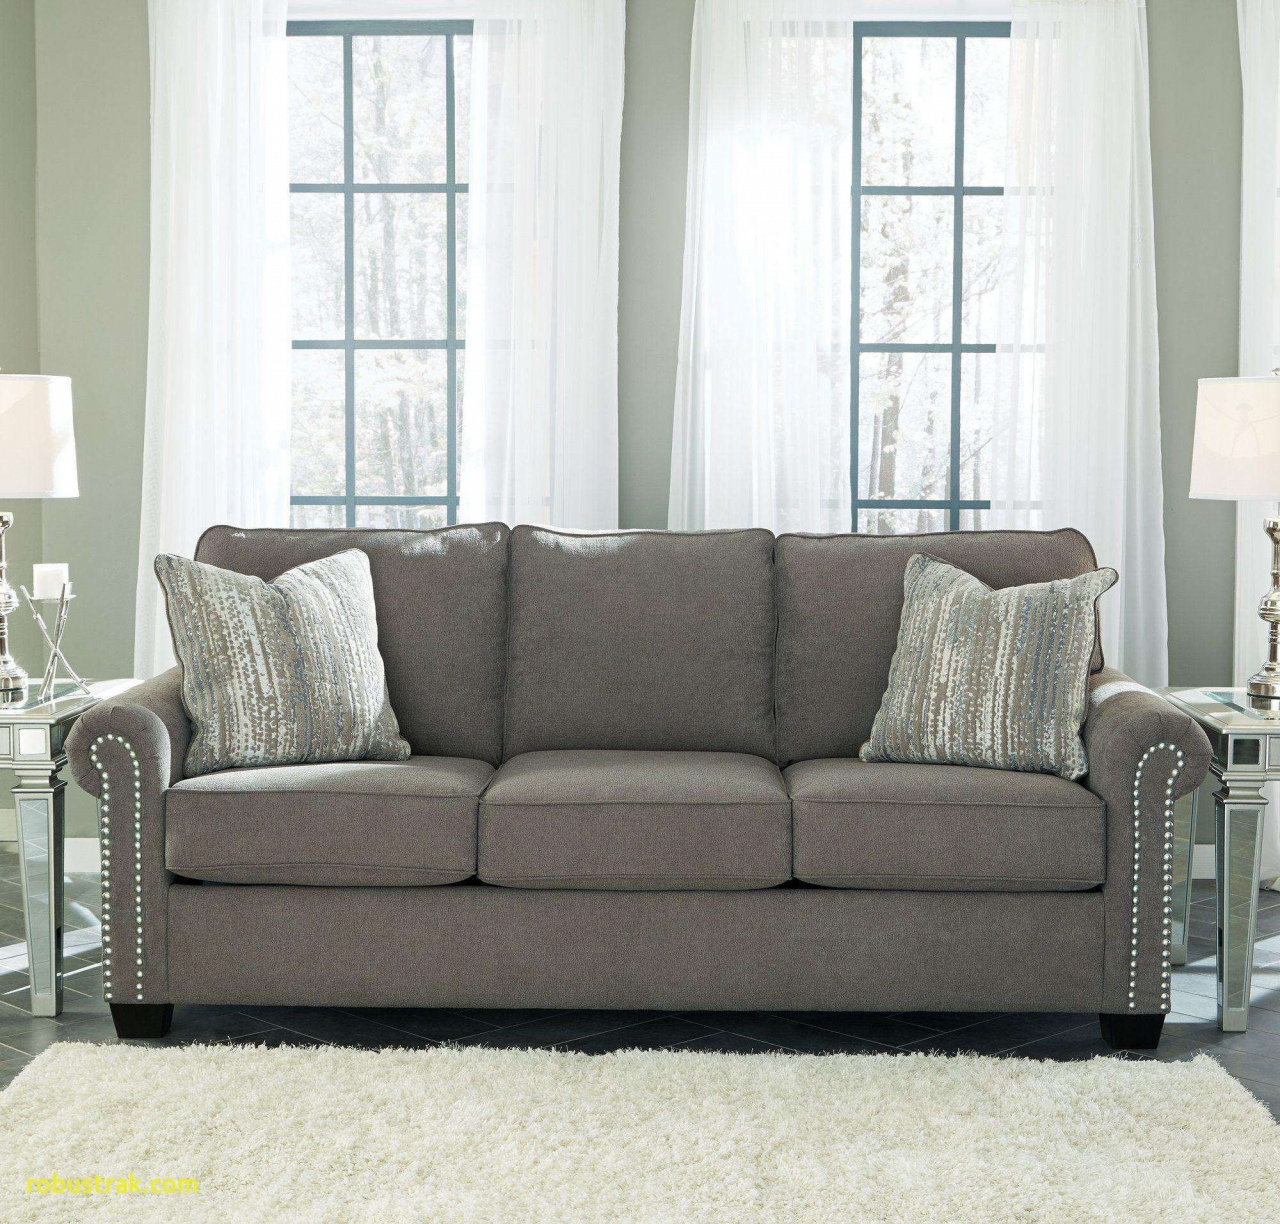 gray couch living room brown couch living room ideas gorgeous l sofa awesome hay couch 0d durch gray couch living room